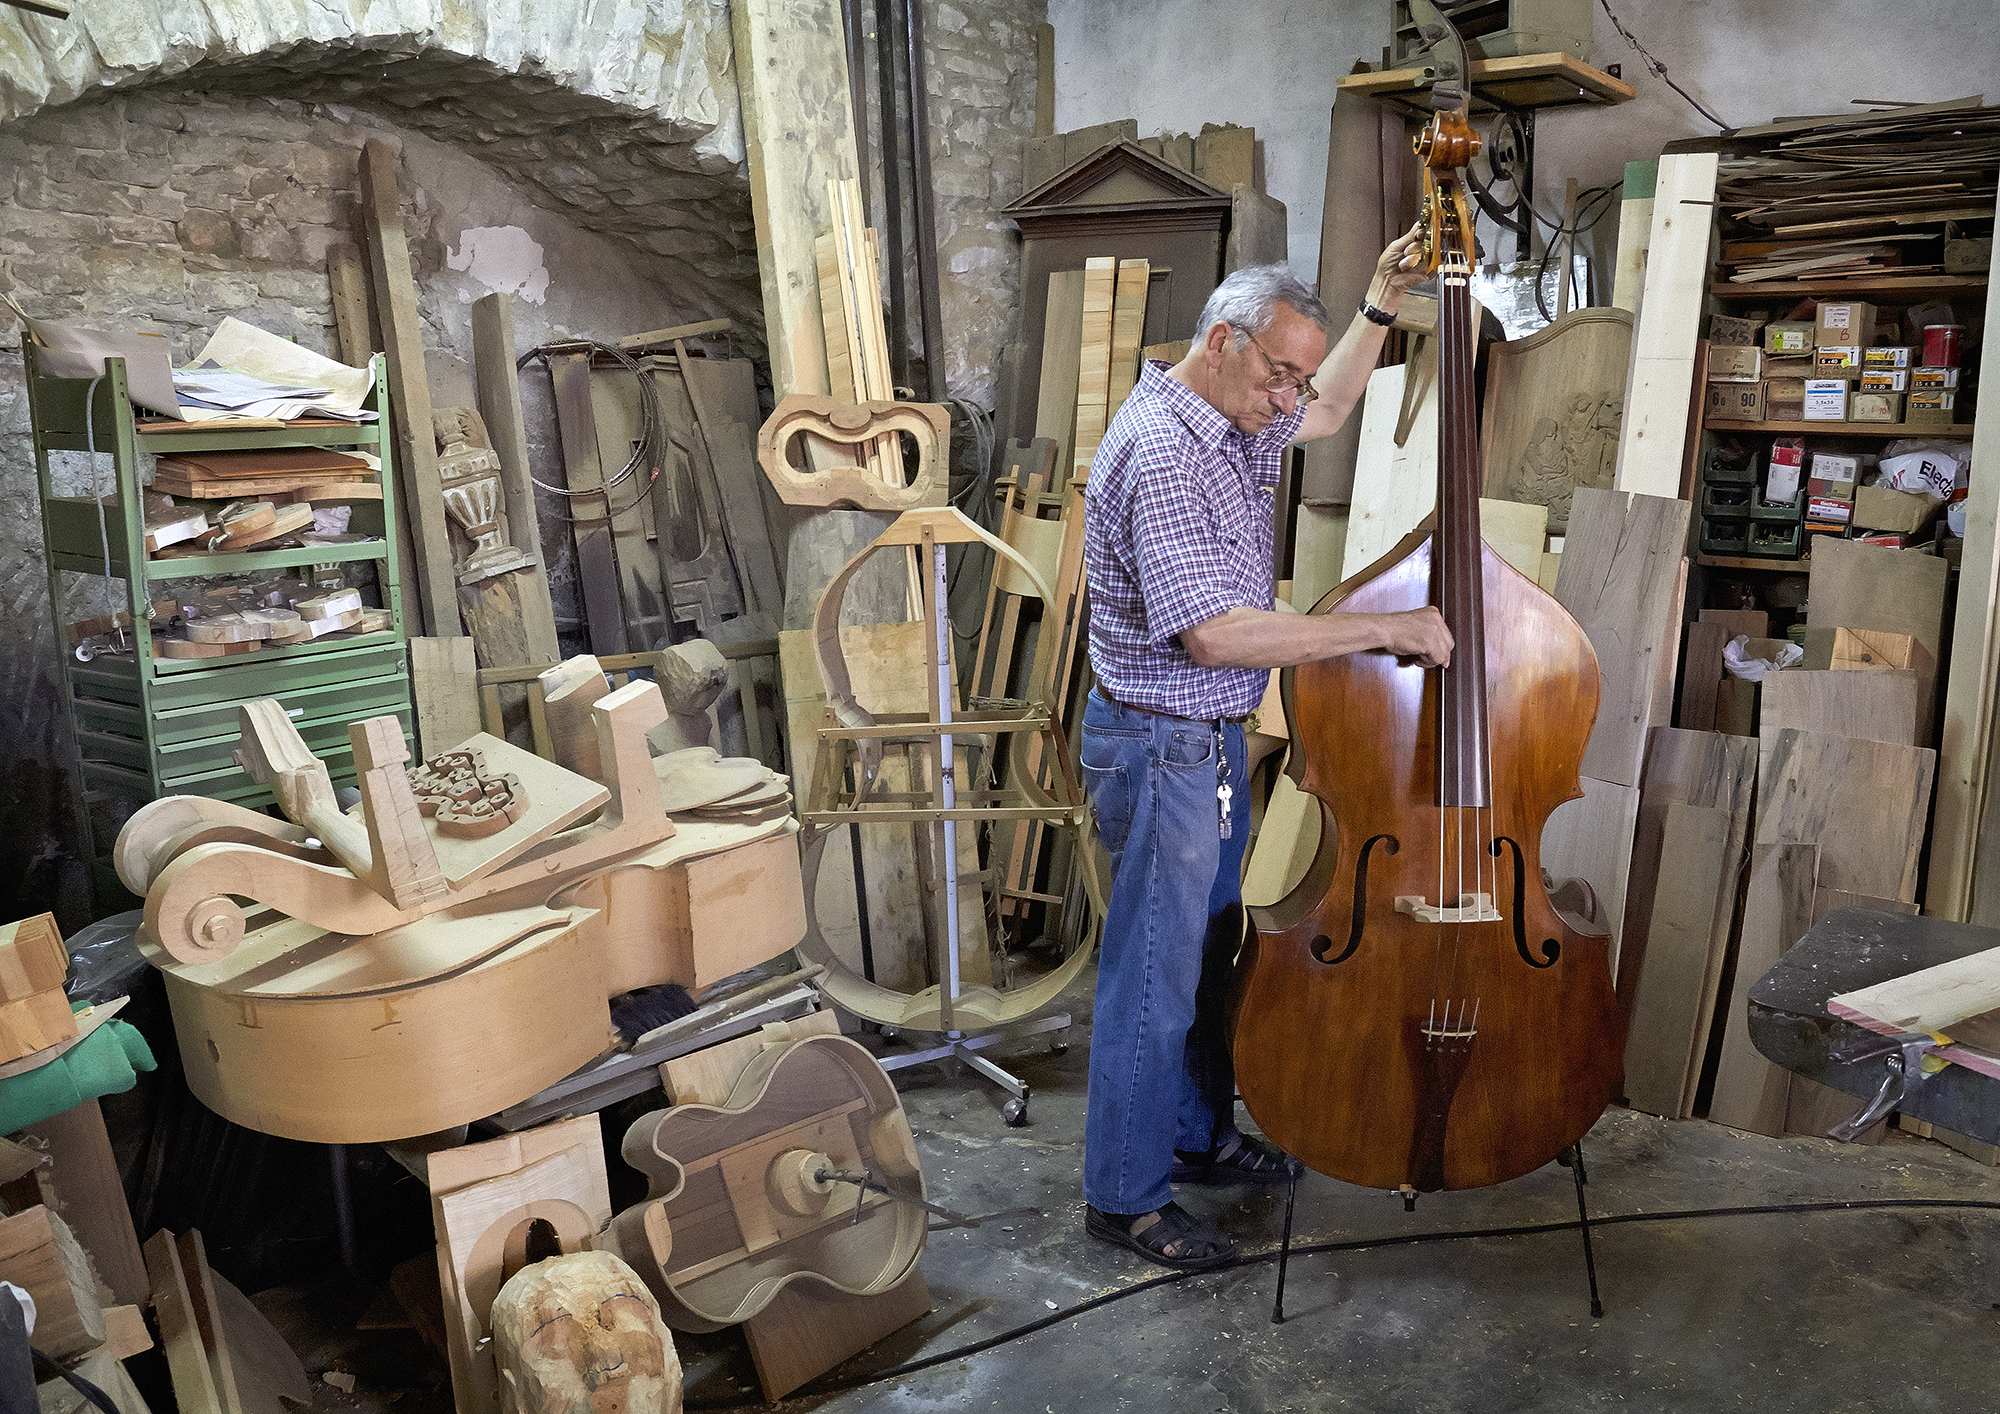 A man tunes a chello in his Instrument workshop while surronded by thin pieces of wood that shape the skeleton of other instruments.